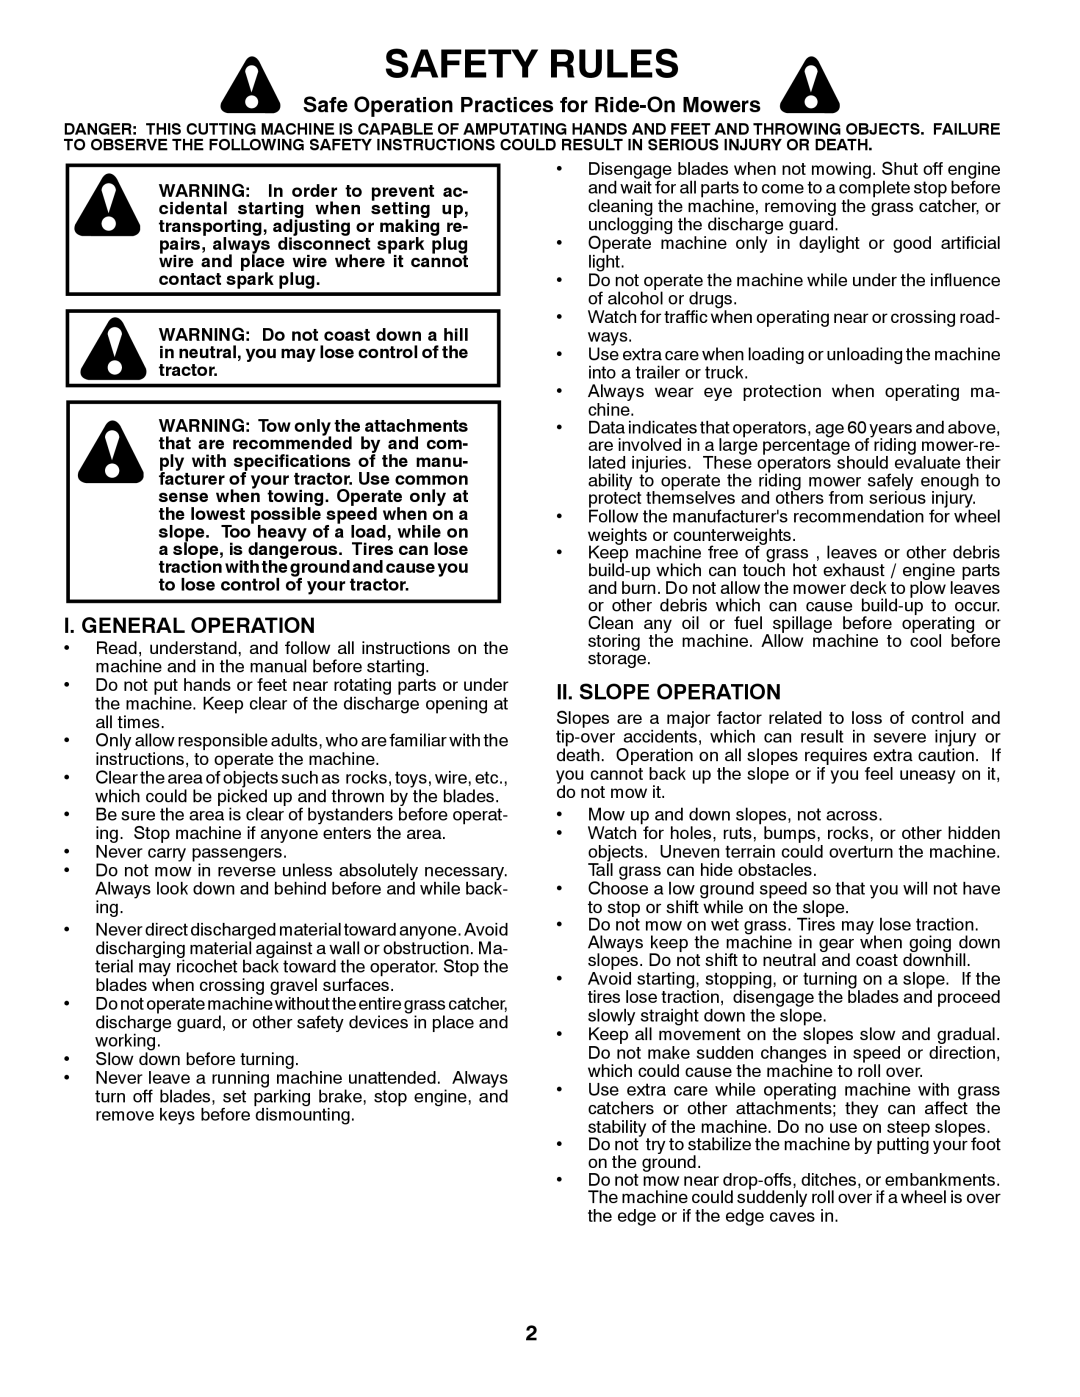 Jonsered LT2218A Safety Rules, Safe Operation Practices for Ride-On Mowers, I. General Operation, Ii. Slope Operation 